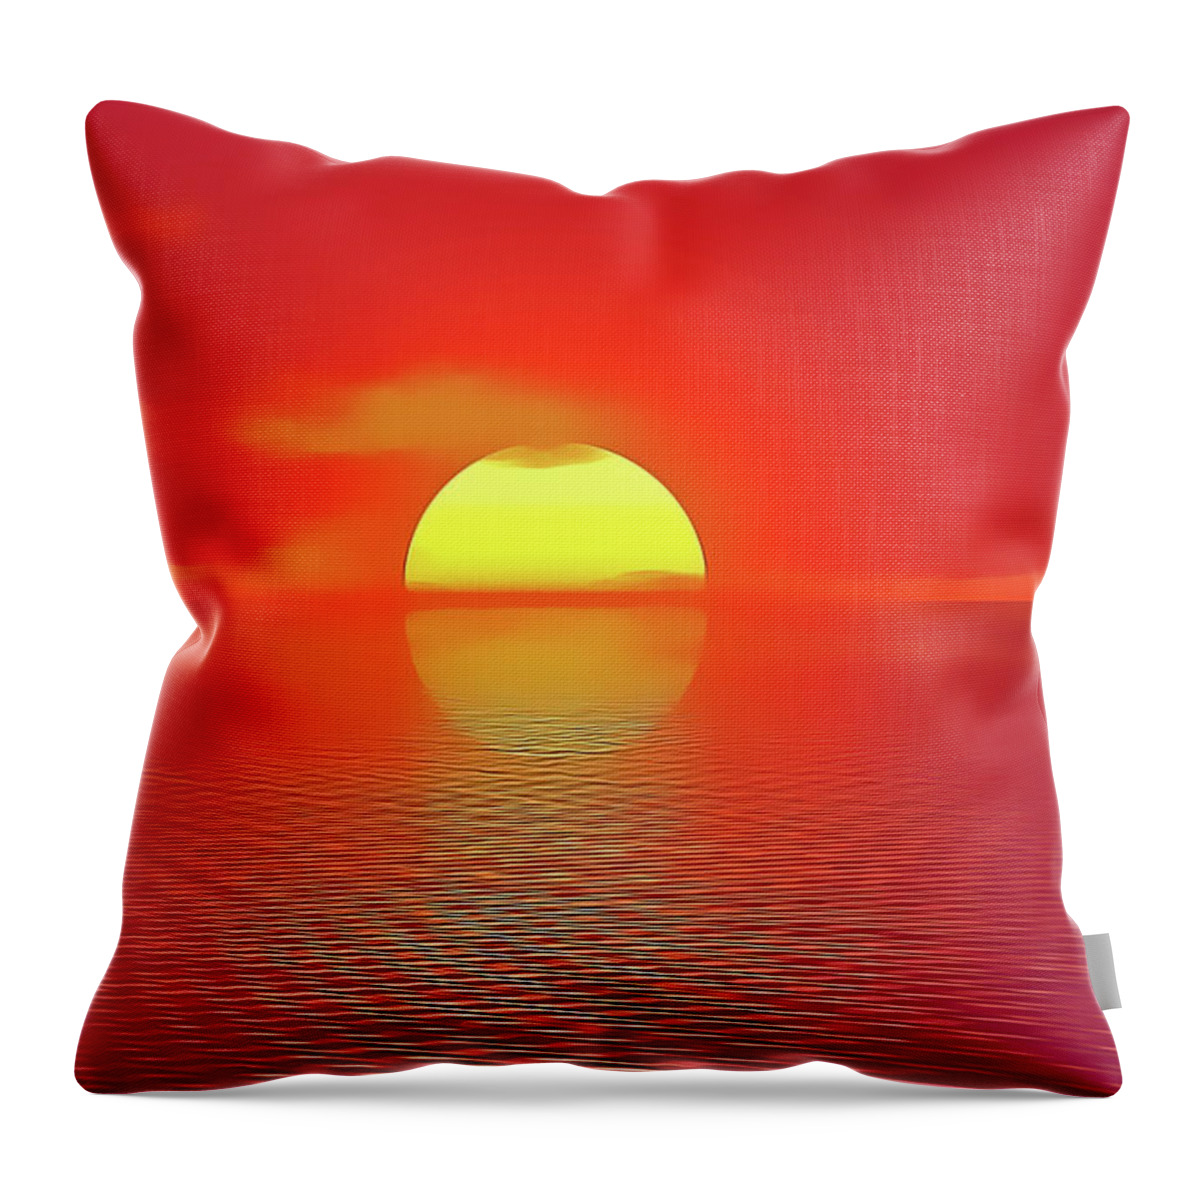 Sunset Throw Pillow featuring the painting Last Sunset by Harry Warrick